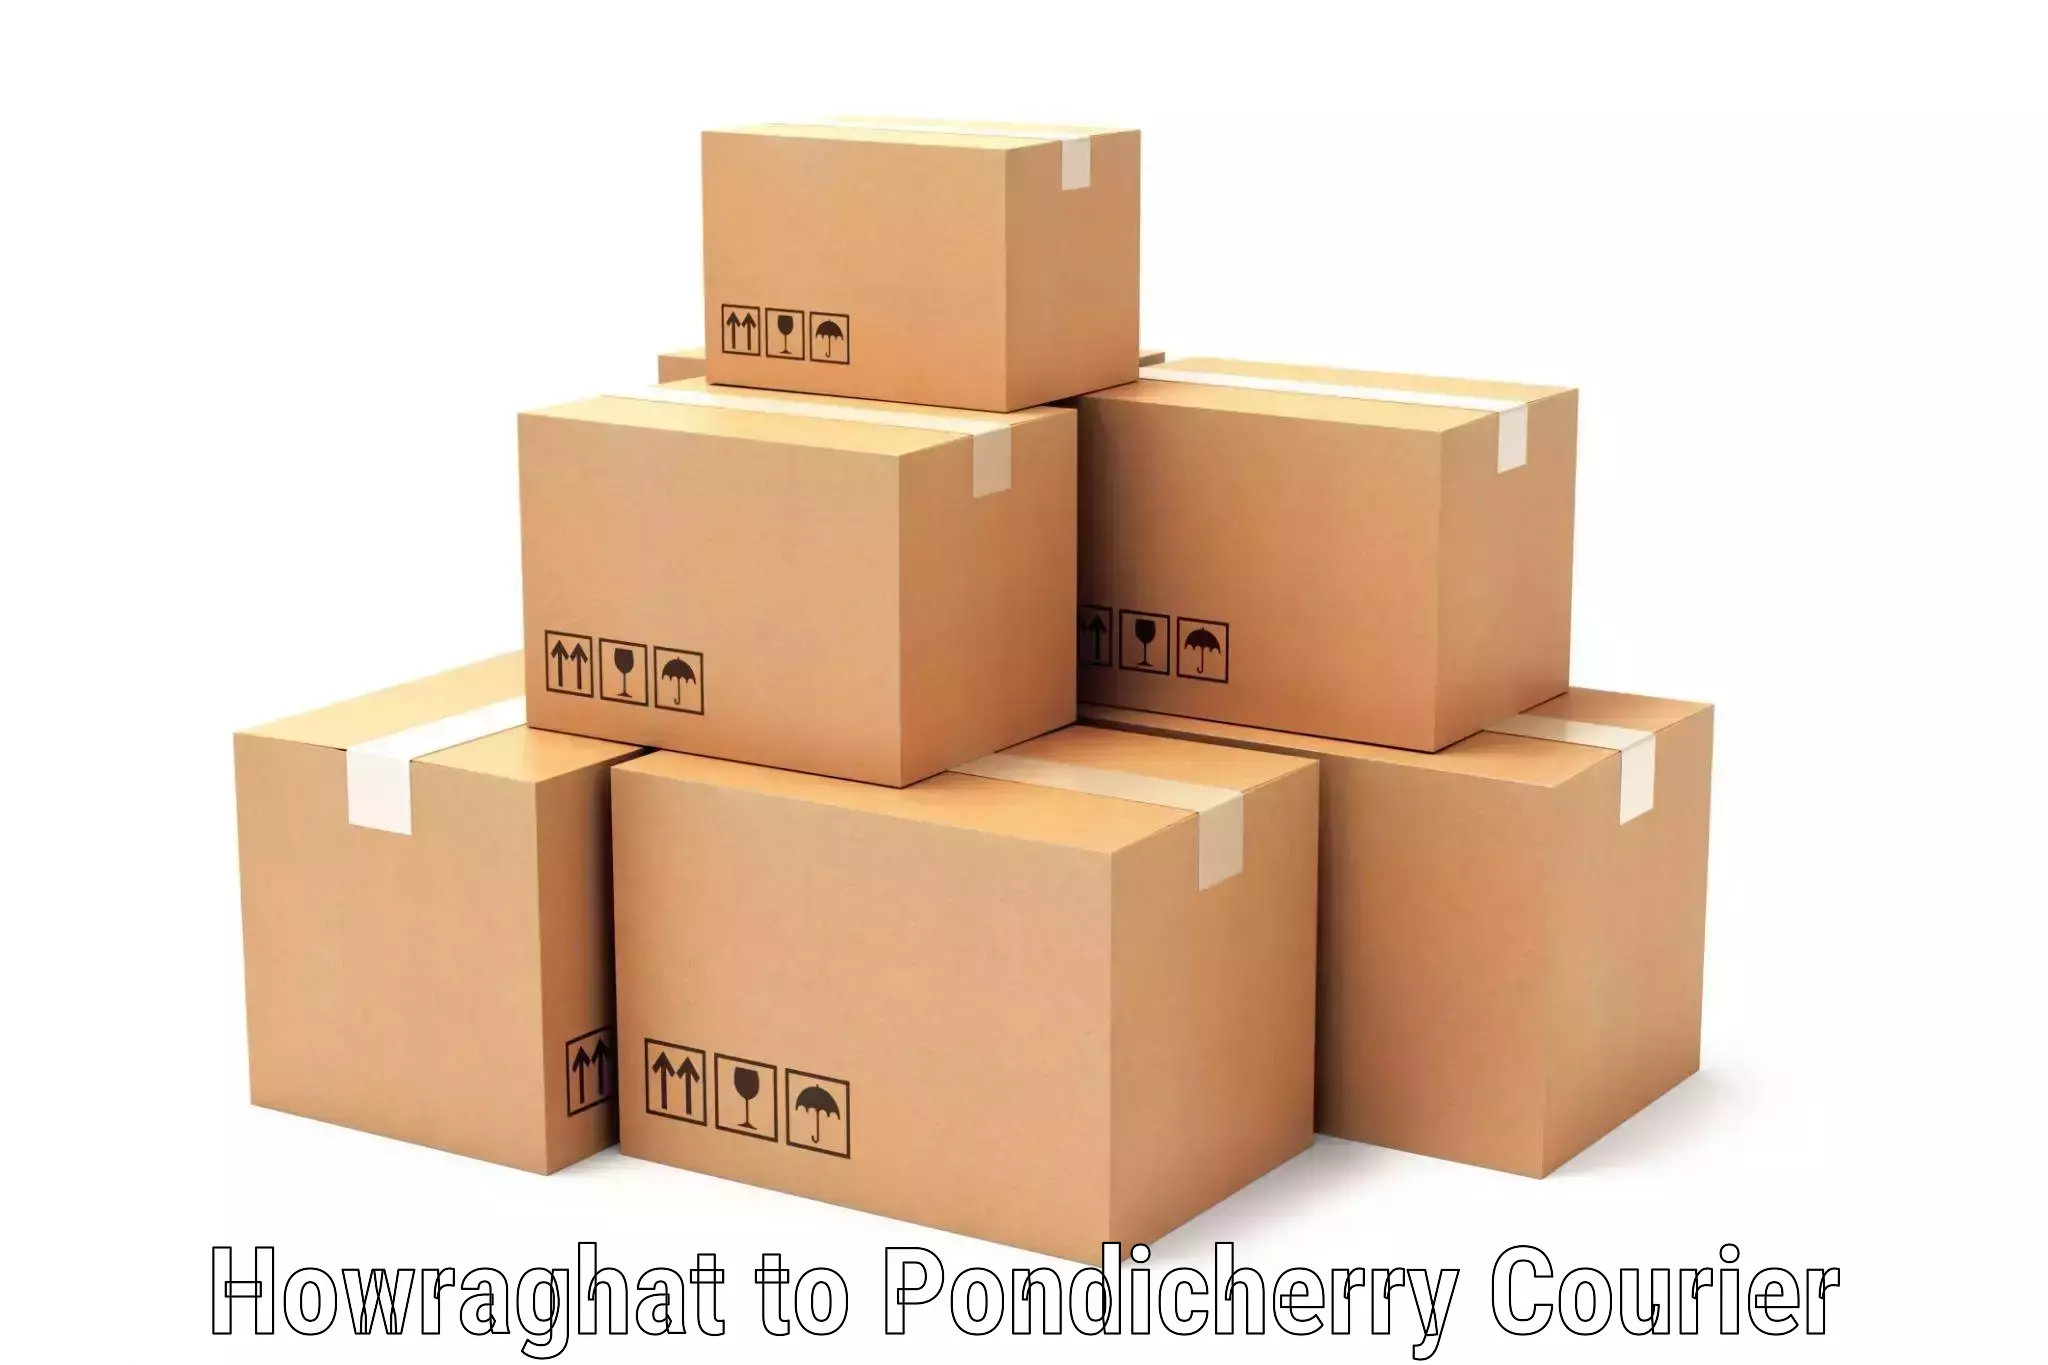 Secure package delivery Howraghat to Pondicherry